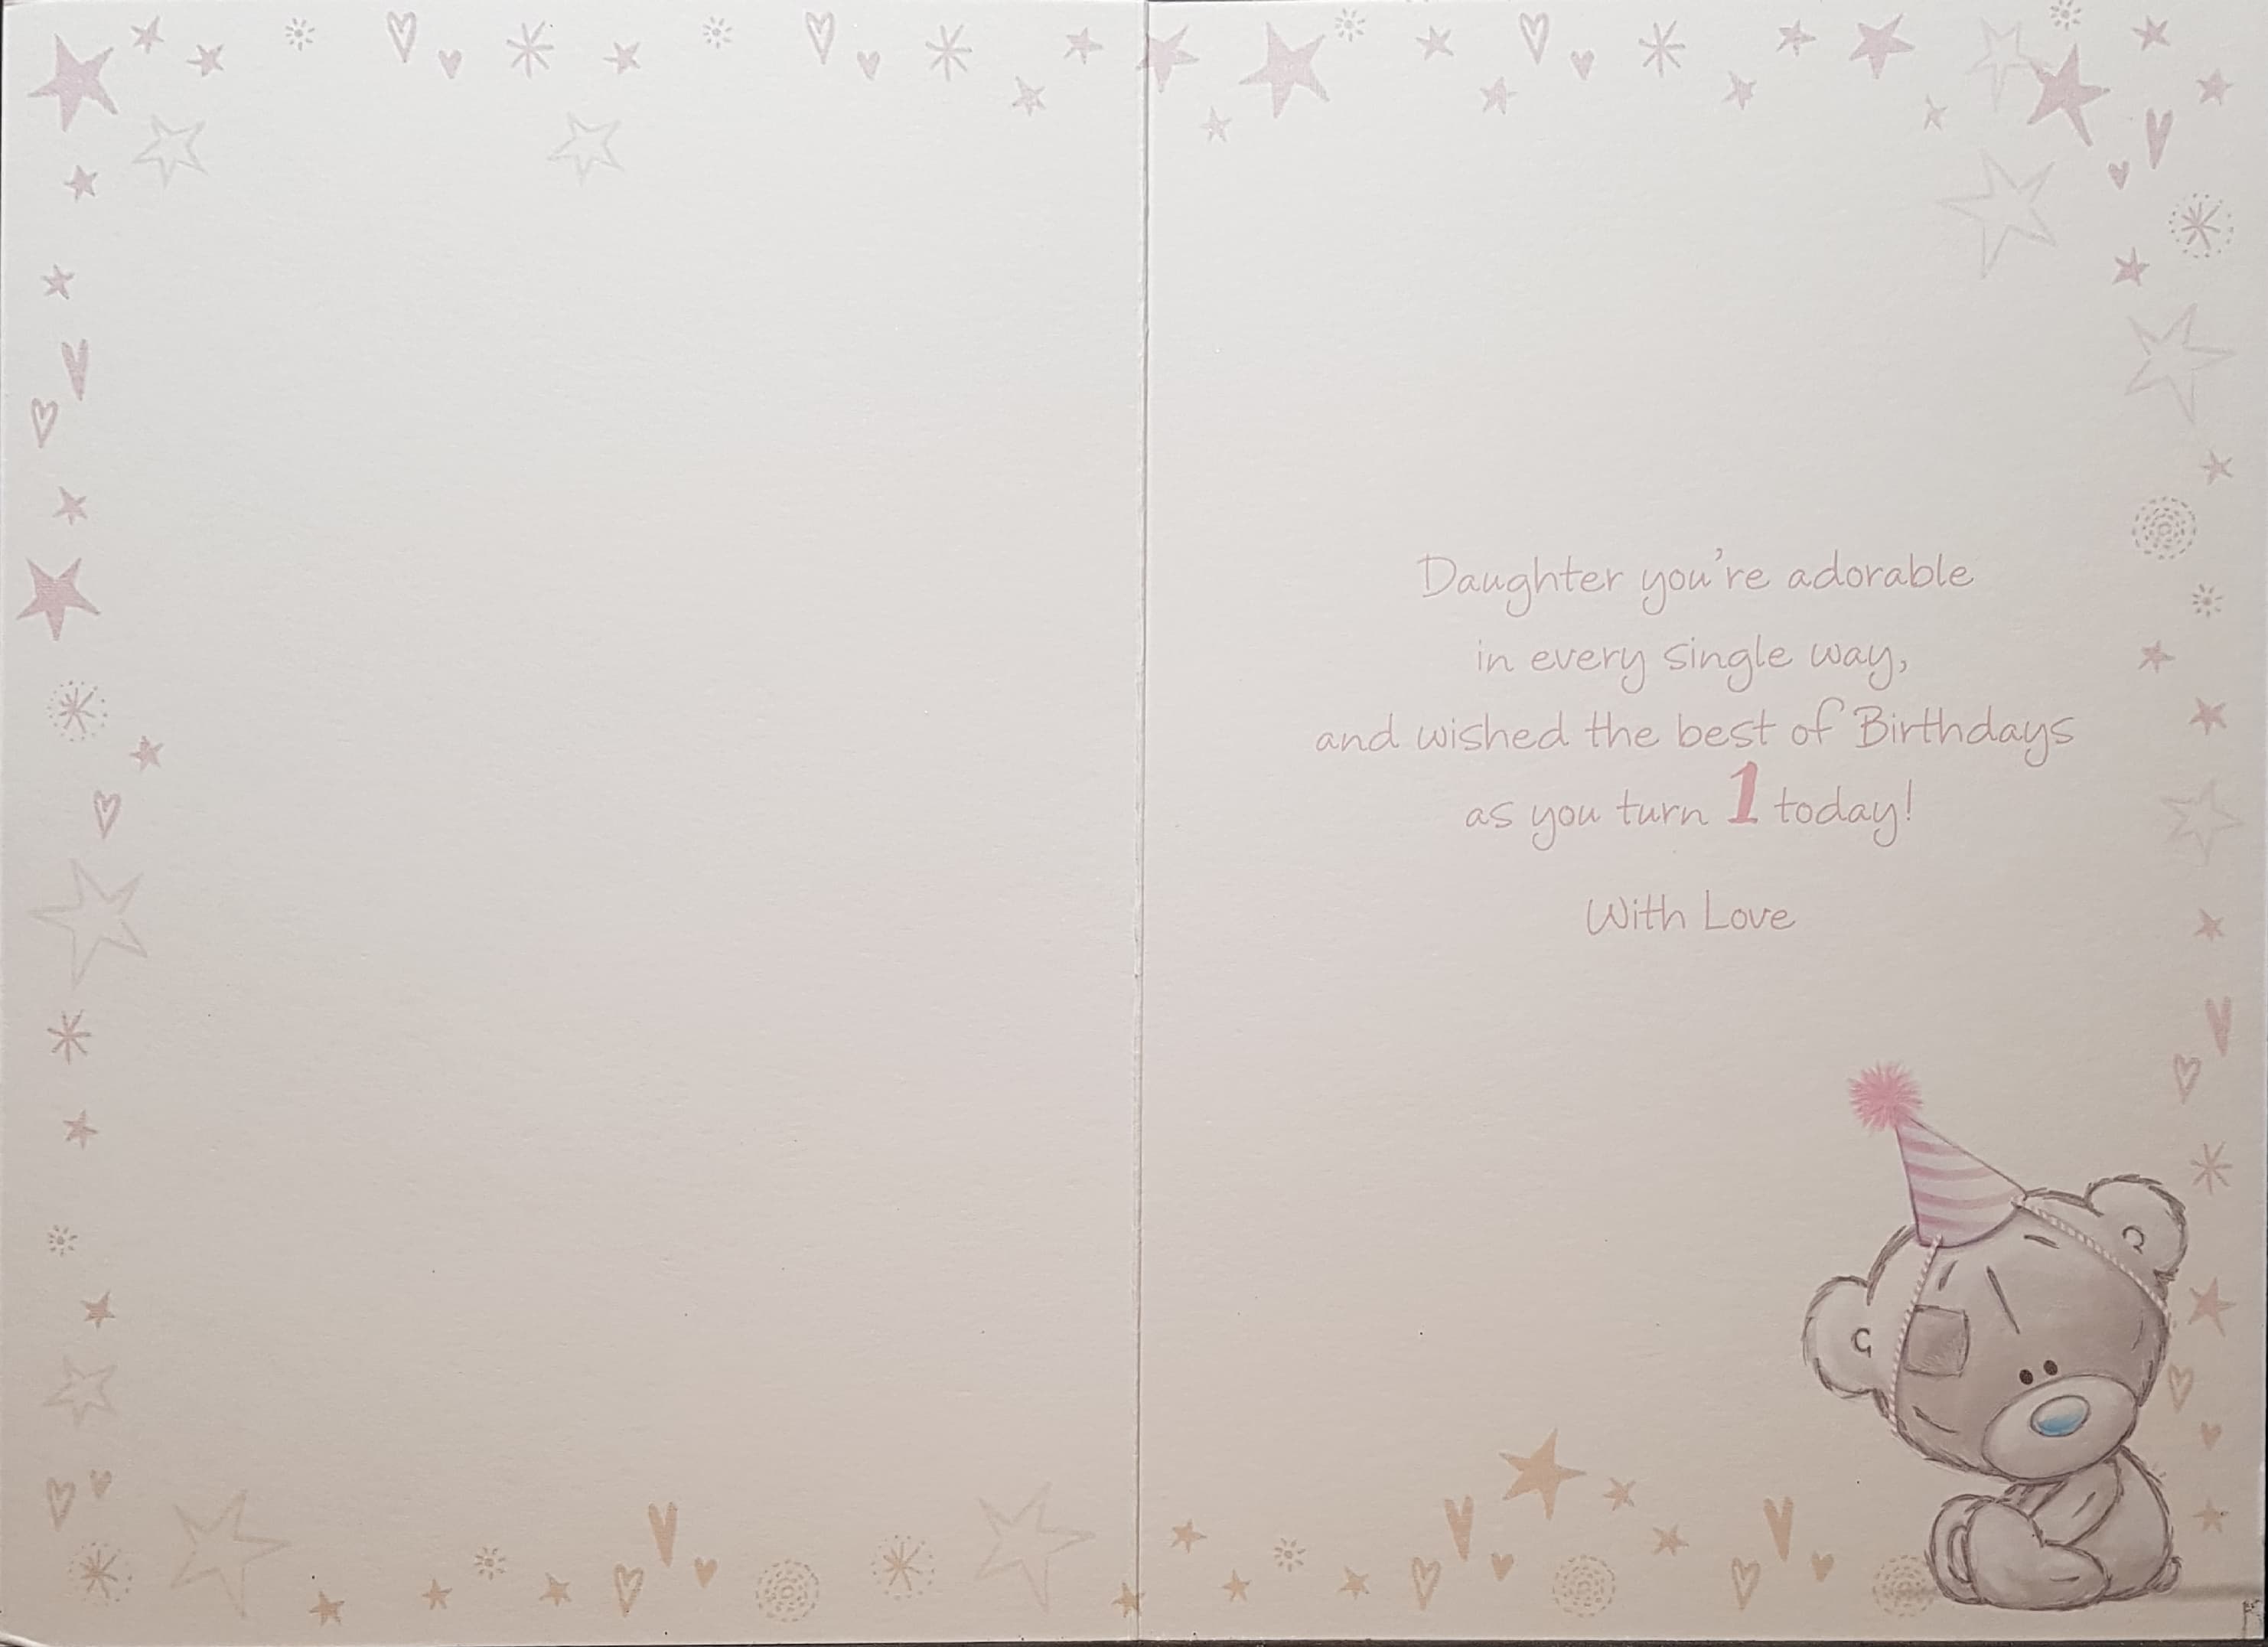 Age 1 Birthday Card - Daughter / Teddy Wearing A Pink Hat Sleeping On The Moon & Pink Stars